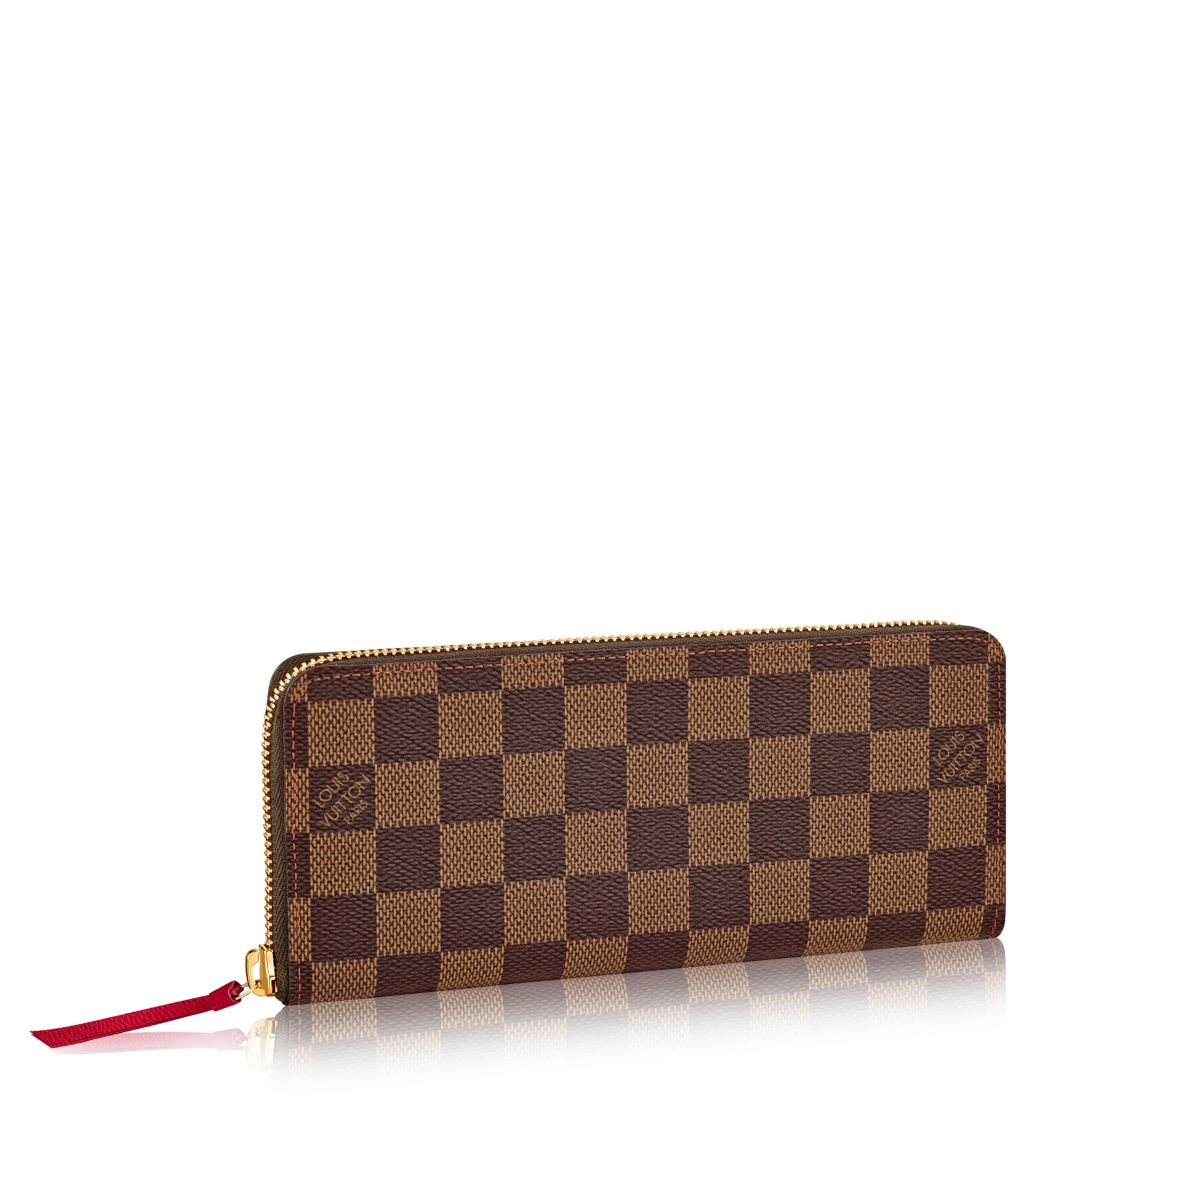 Louis Vuitton Clemence Penguin Wallet | Confederated Tribes of the Umatilla Indian Reservation